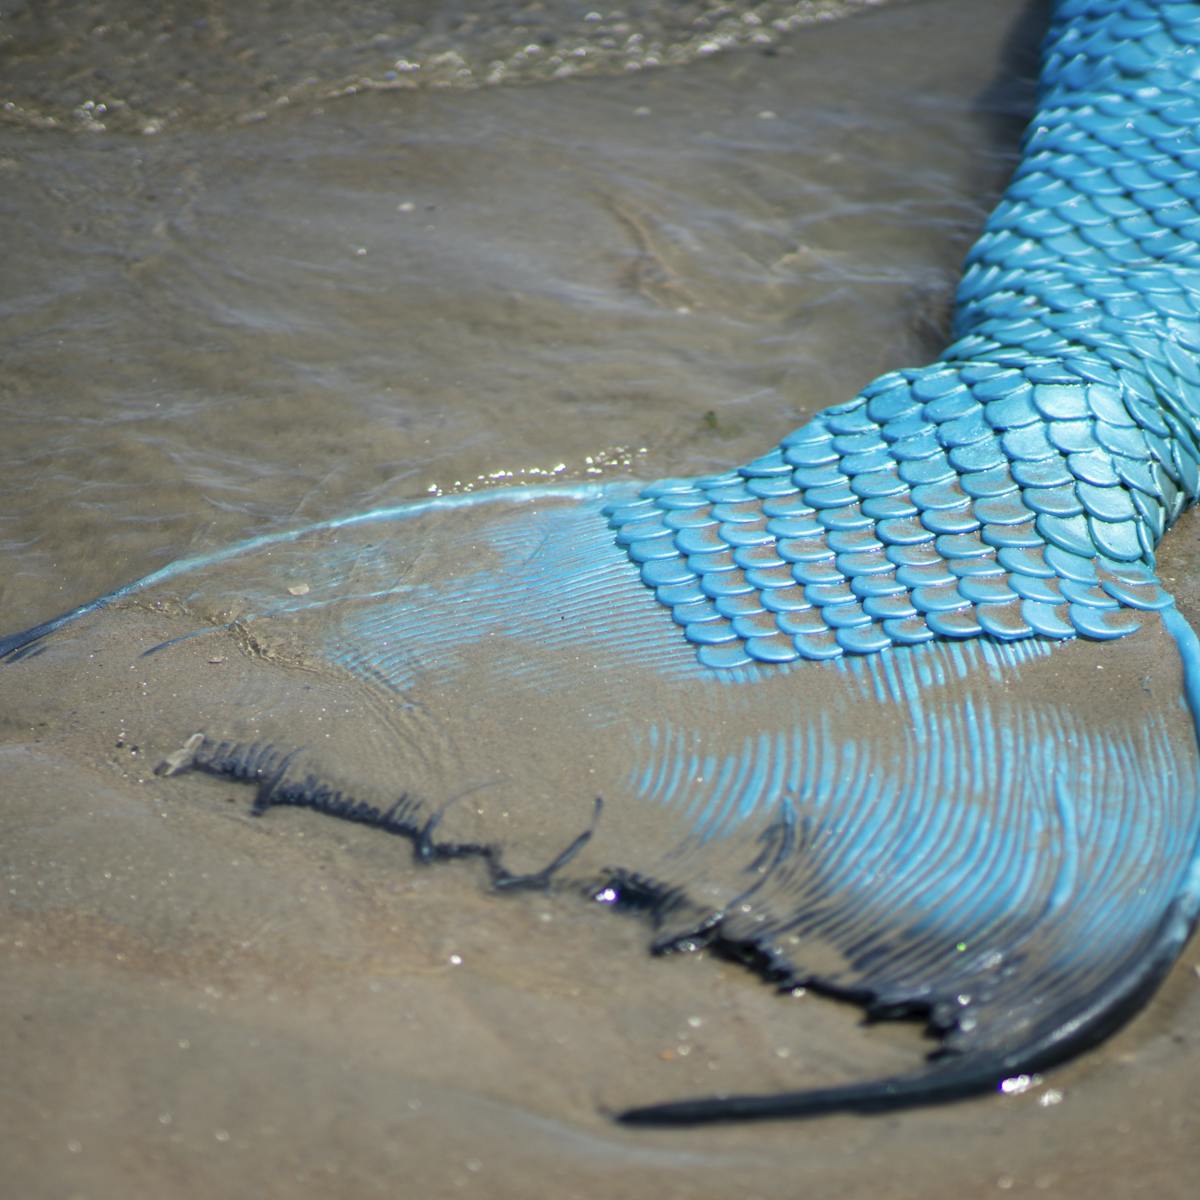 Mermaids aren't real – but they've fascinated people around the ...